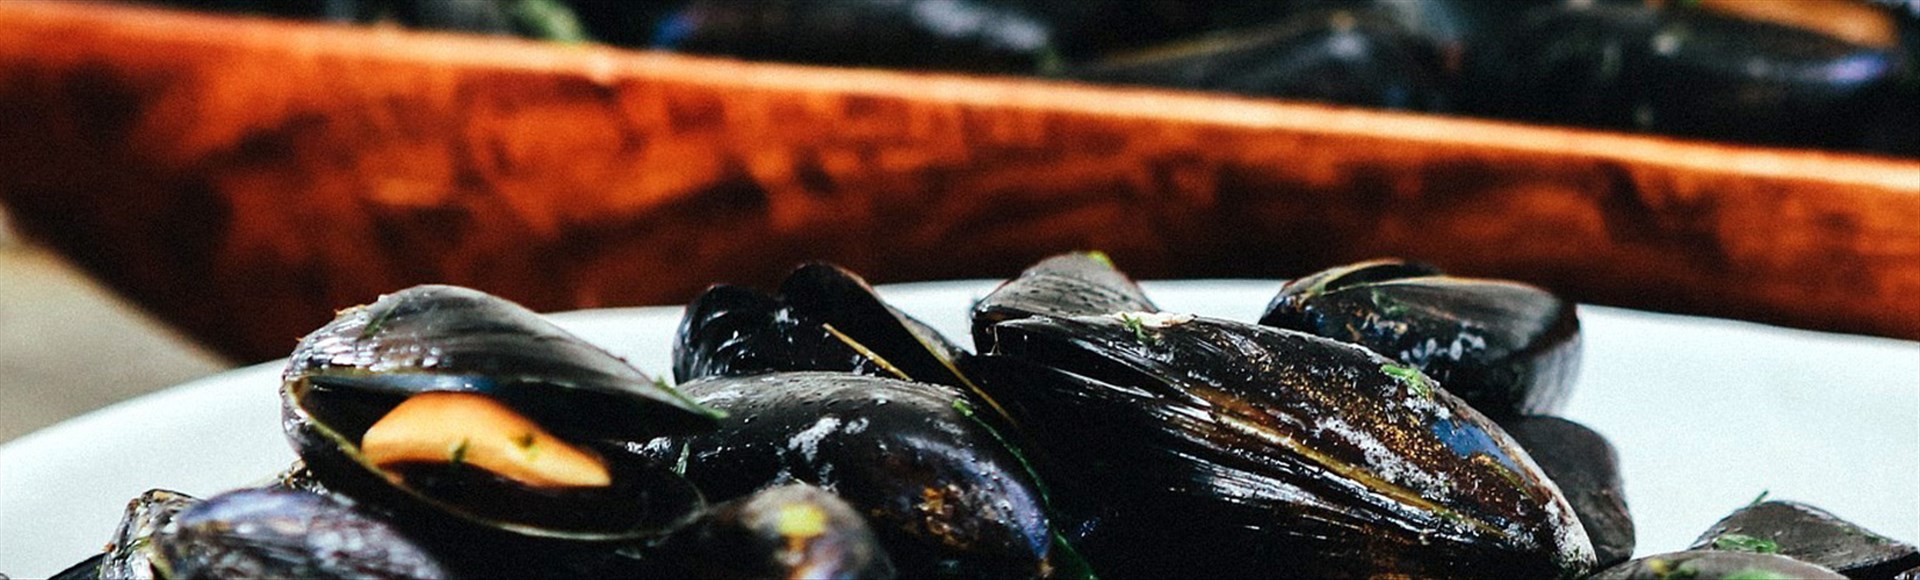 steamed-mussels-with-ouzo-and-fresh-tomatoes - Alargo Private Chef Service in Crete | Christos & Michael